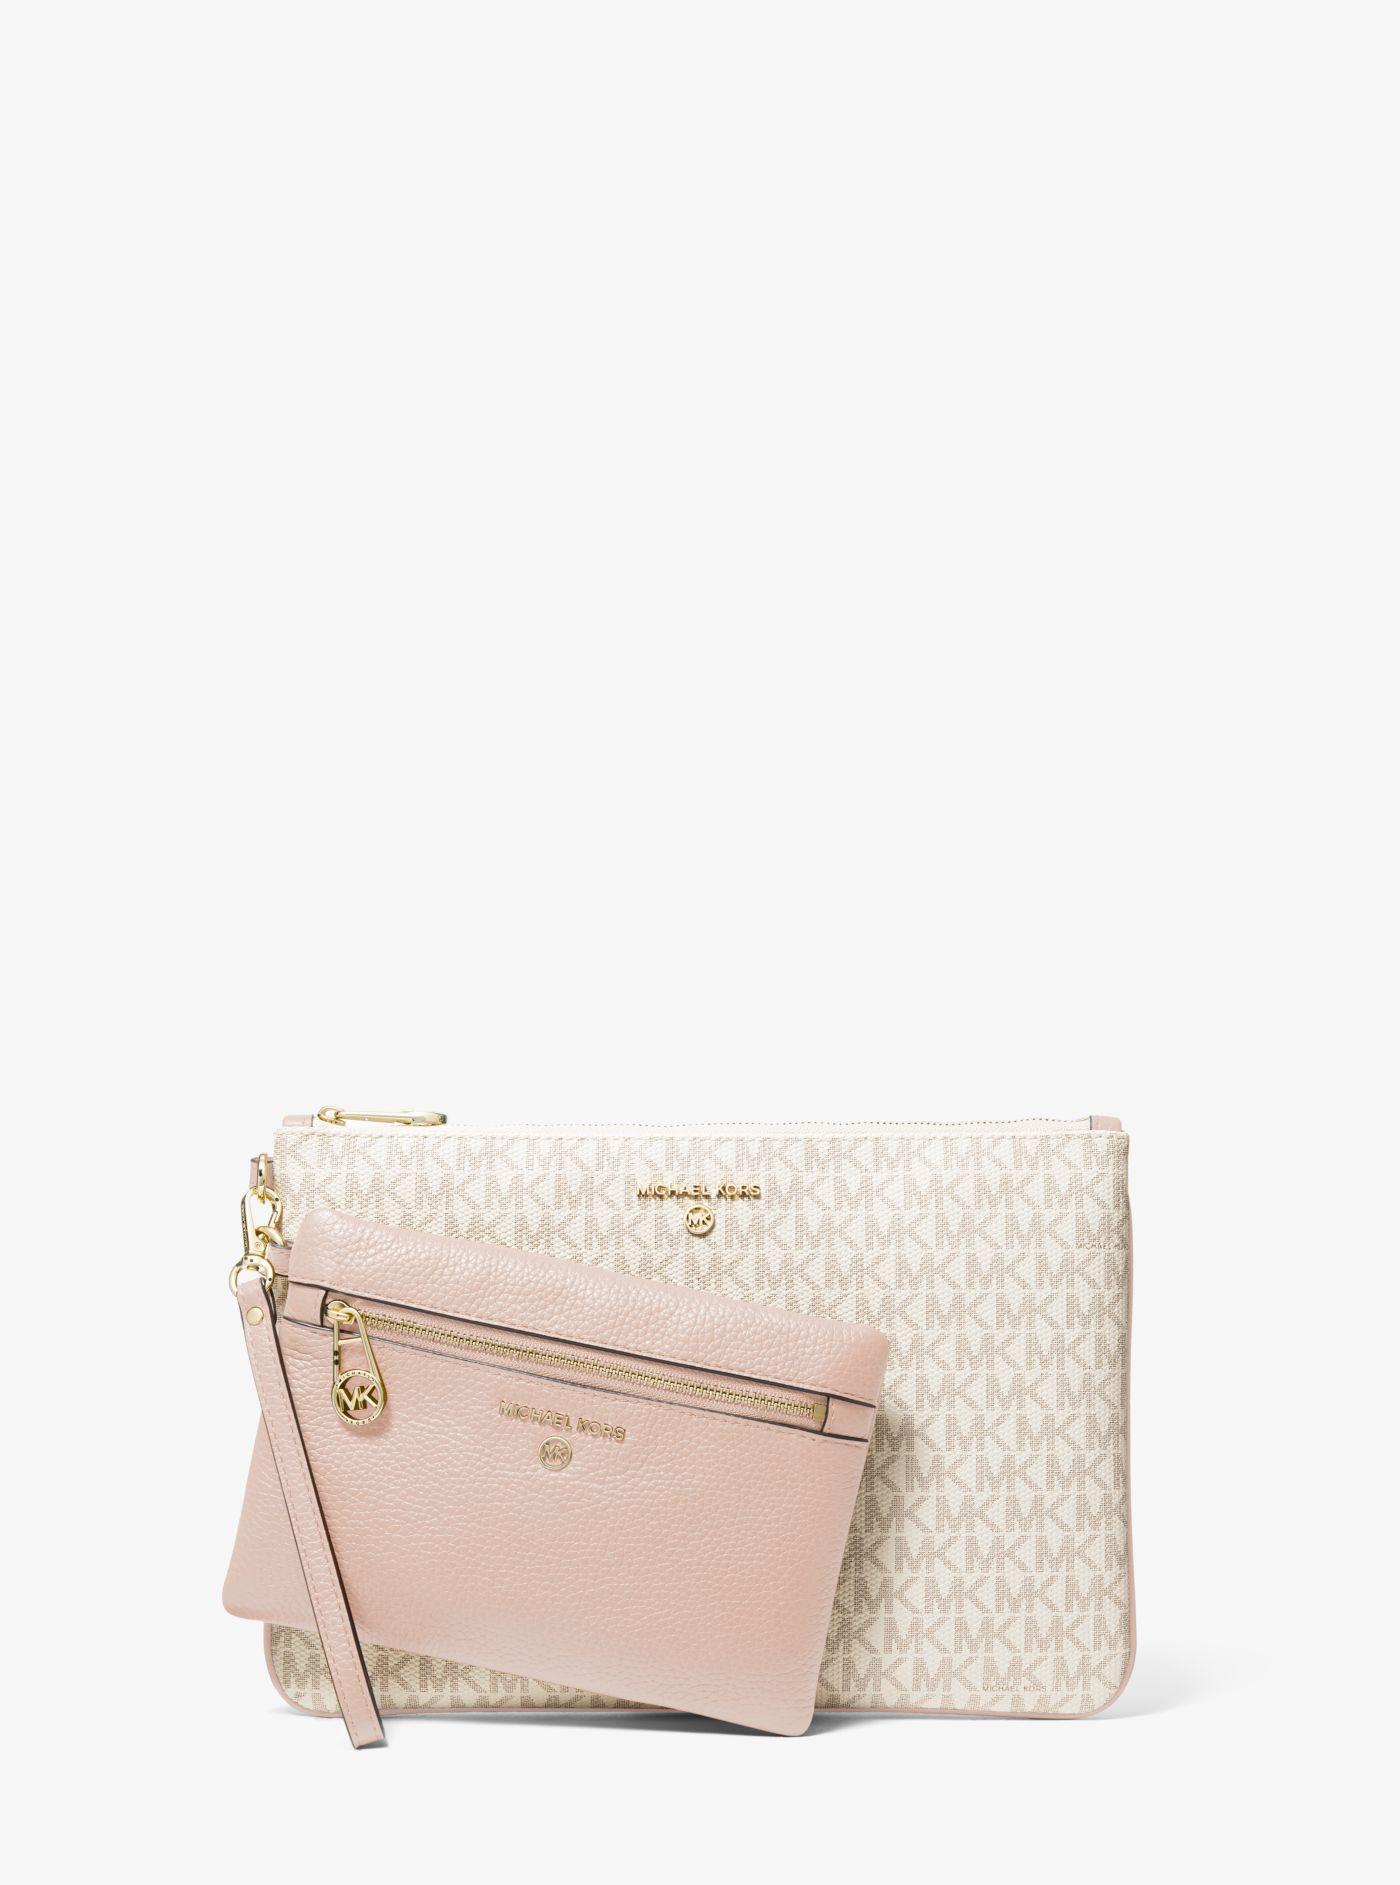 Michael Kors Slater Large Logo And Leather 2-in-1 Wristlet in Vanilla/Soft  Pink (Pink) - Lyst